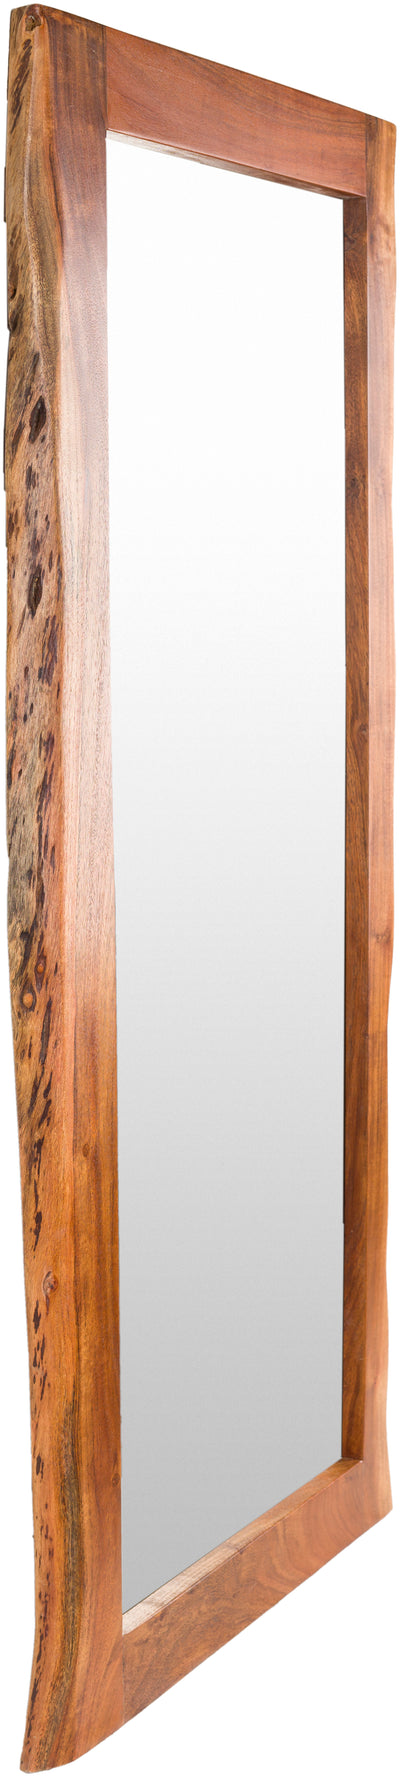 product image for Edge DGE-101 Tall Rectangular Mirror by Surya 35